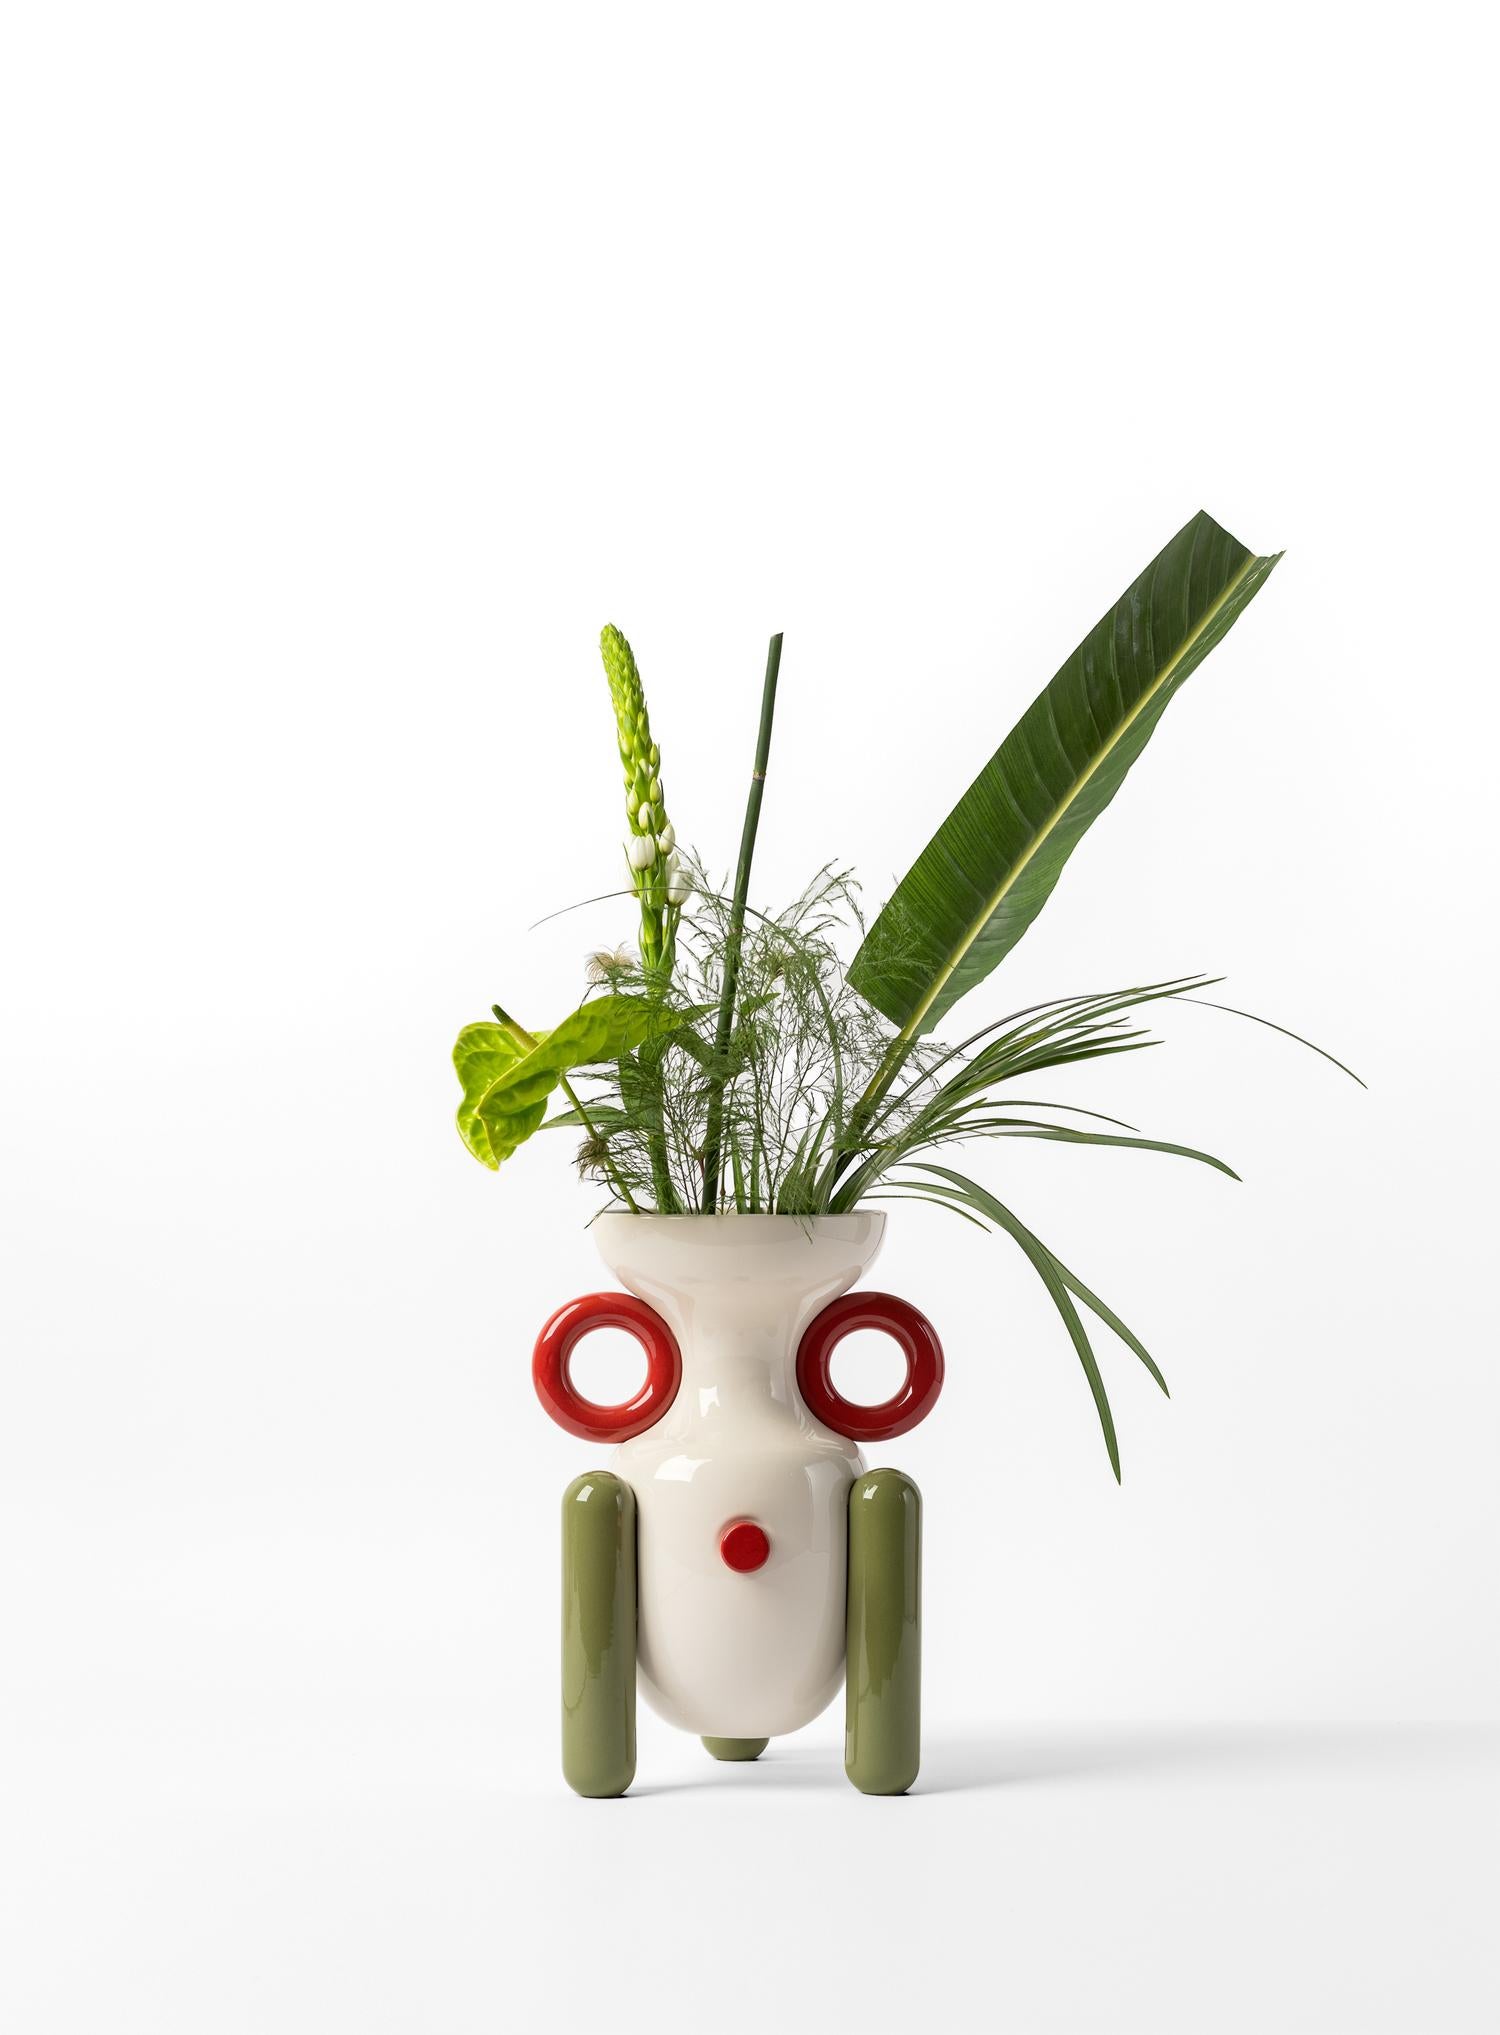 Contemporary Glazed Ceramic Explorer Vase No.2, white red green, by Jaime Hayon For Sale 1